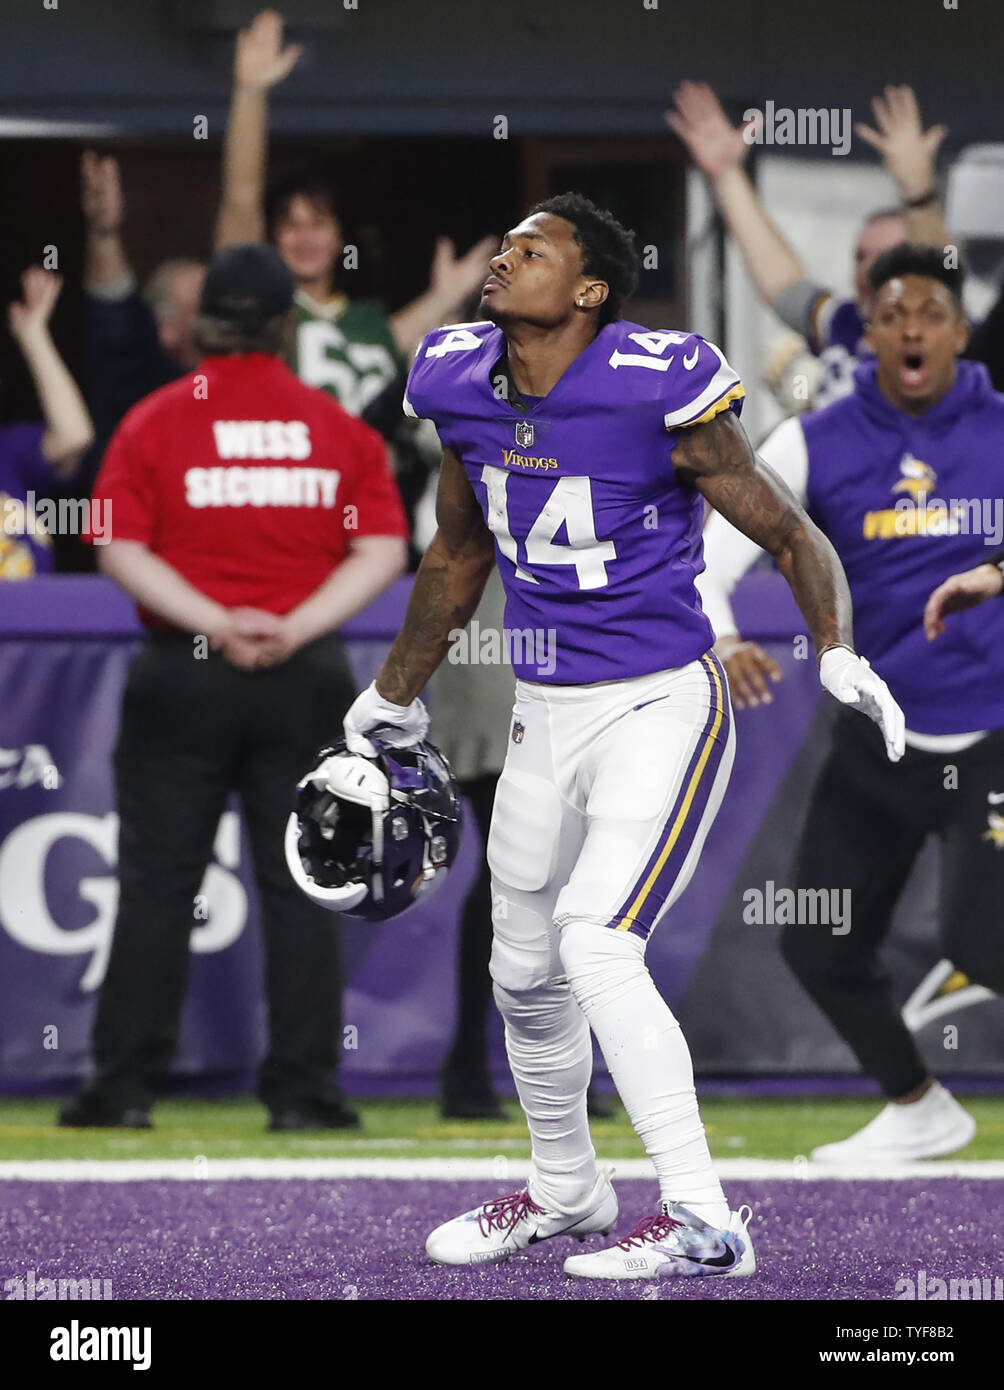 Minnesota Vikings wide receiver Stefon Diggs reacts after scoring the game  winning touchdown against the New Orleans Saints in the second half of the  NFC Divisional round playoff game at U.S. Bank